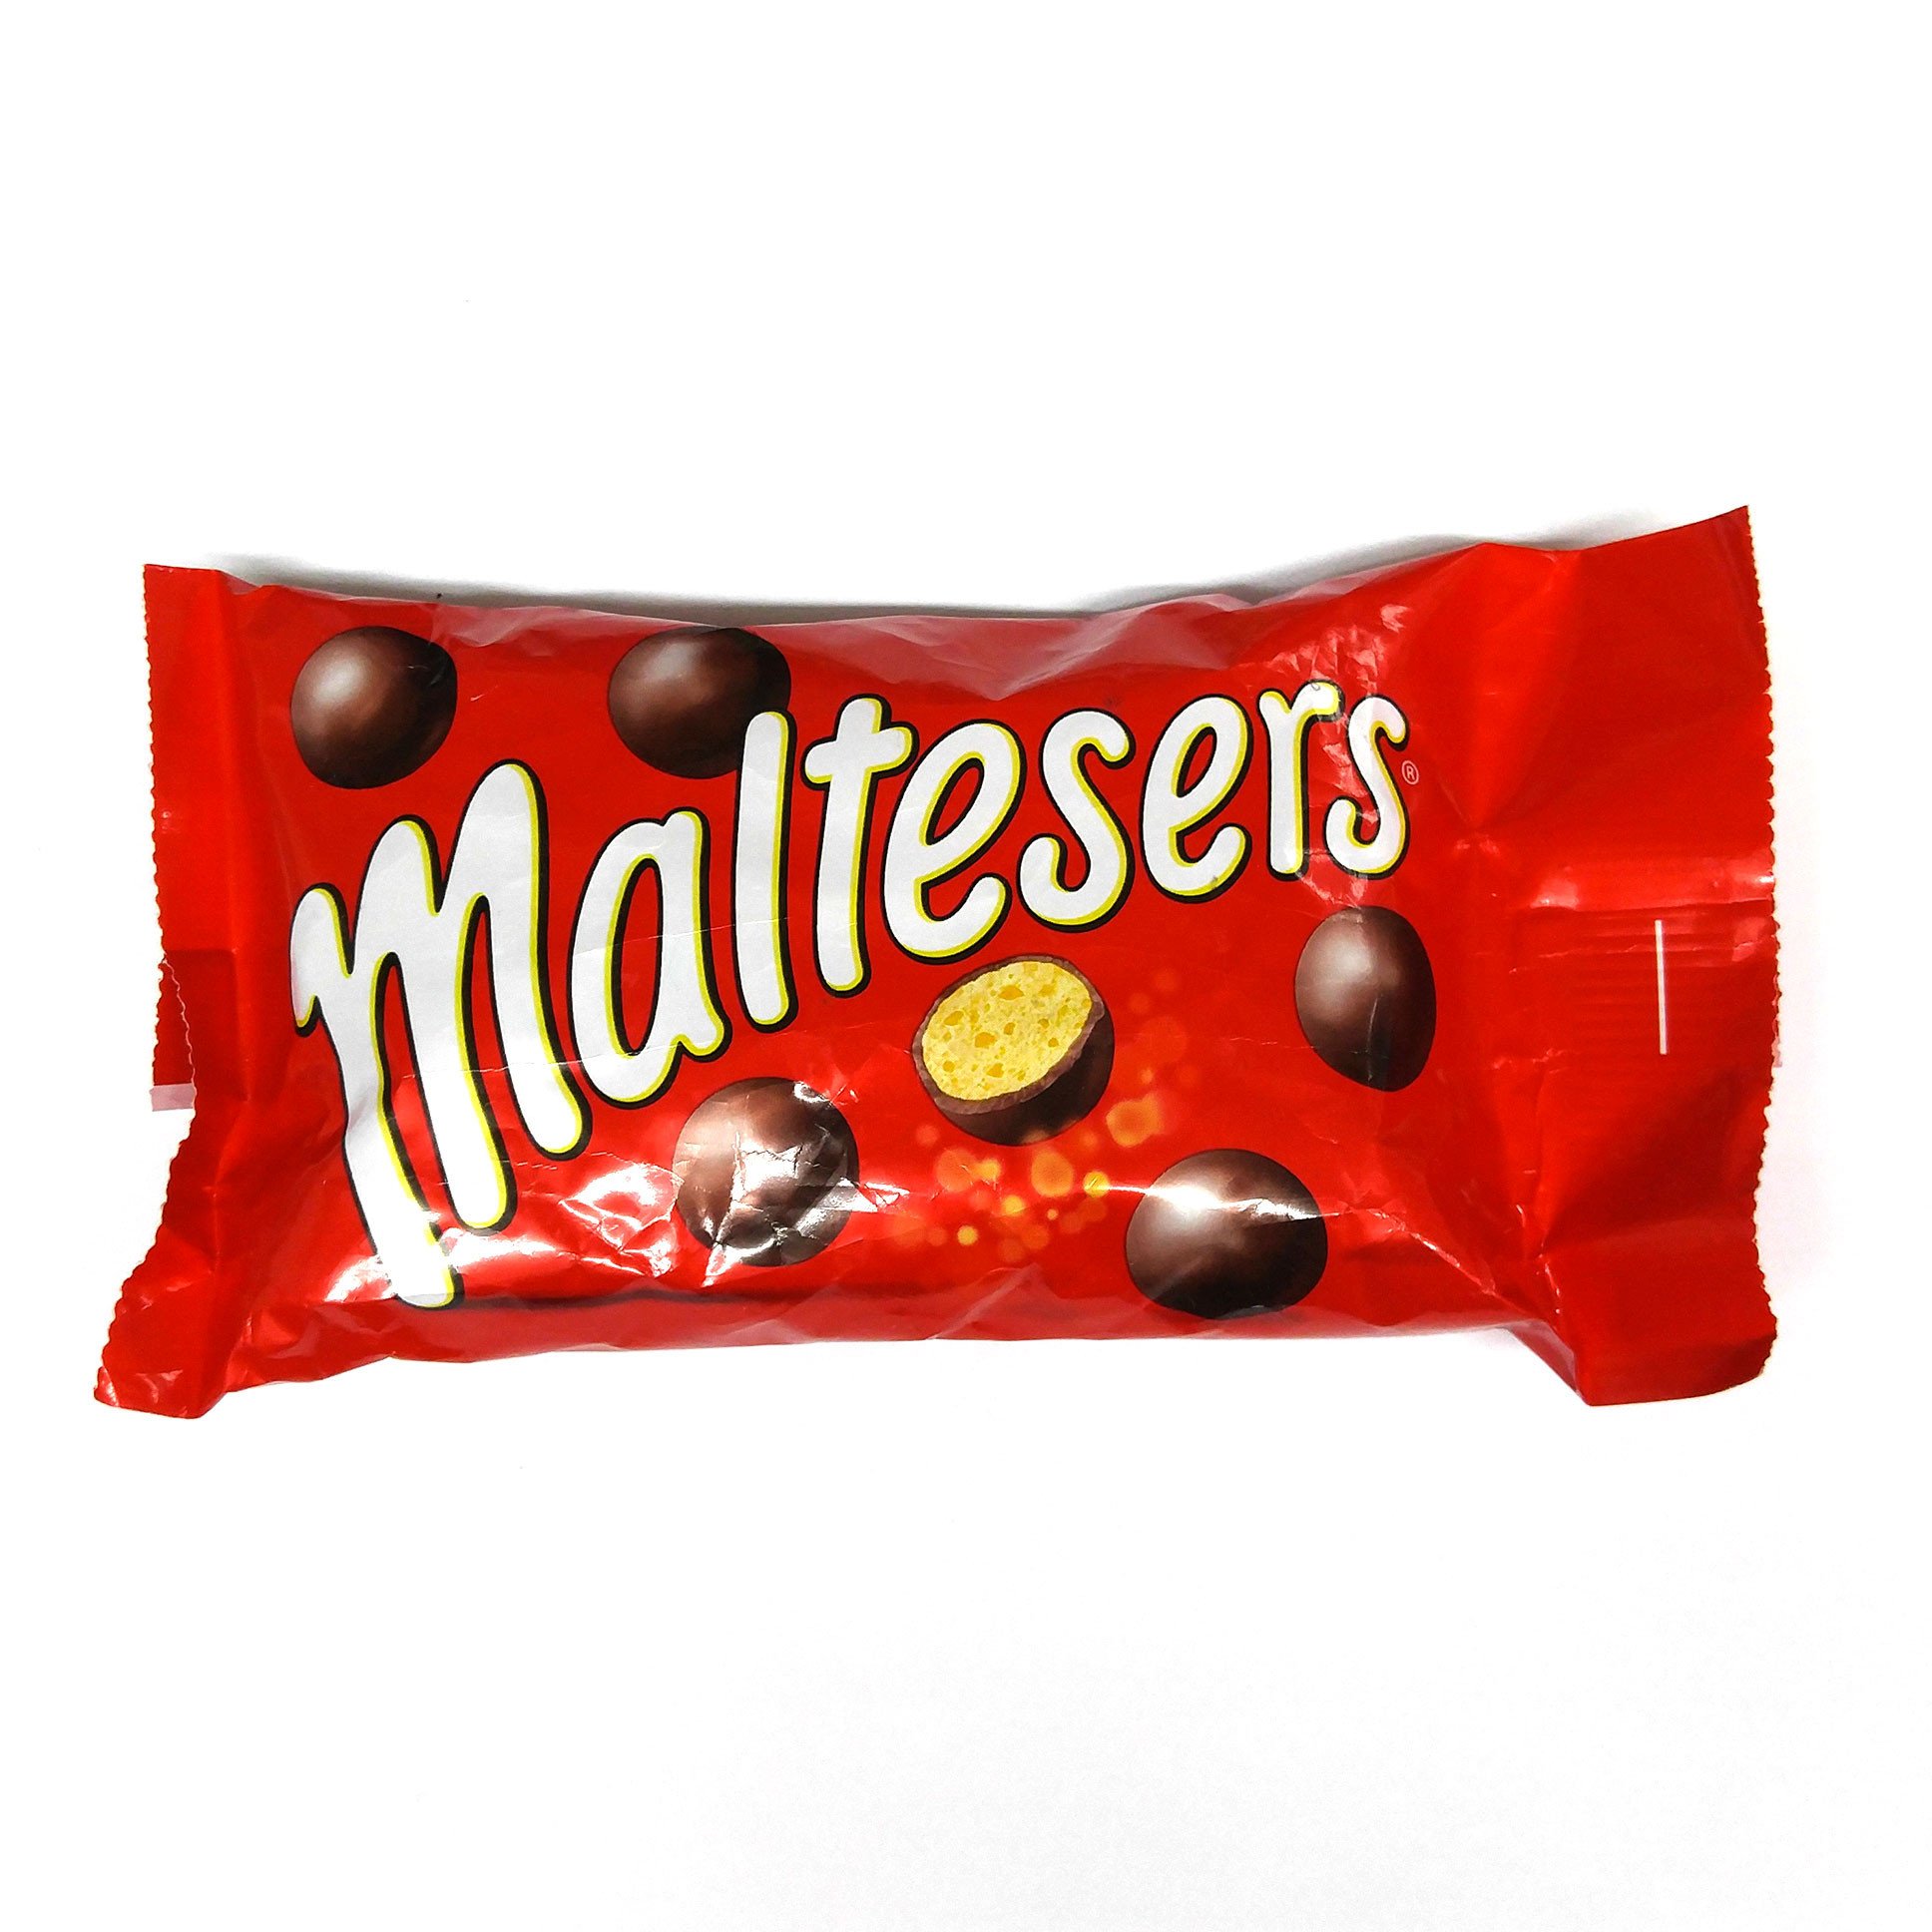 Maltesers – Snyder's Candy